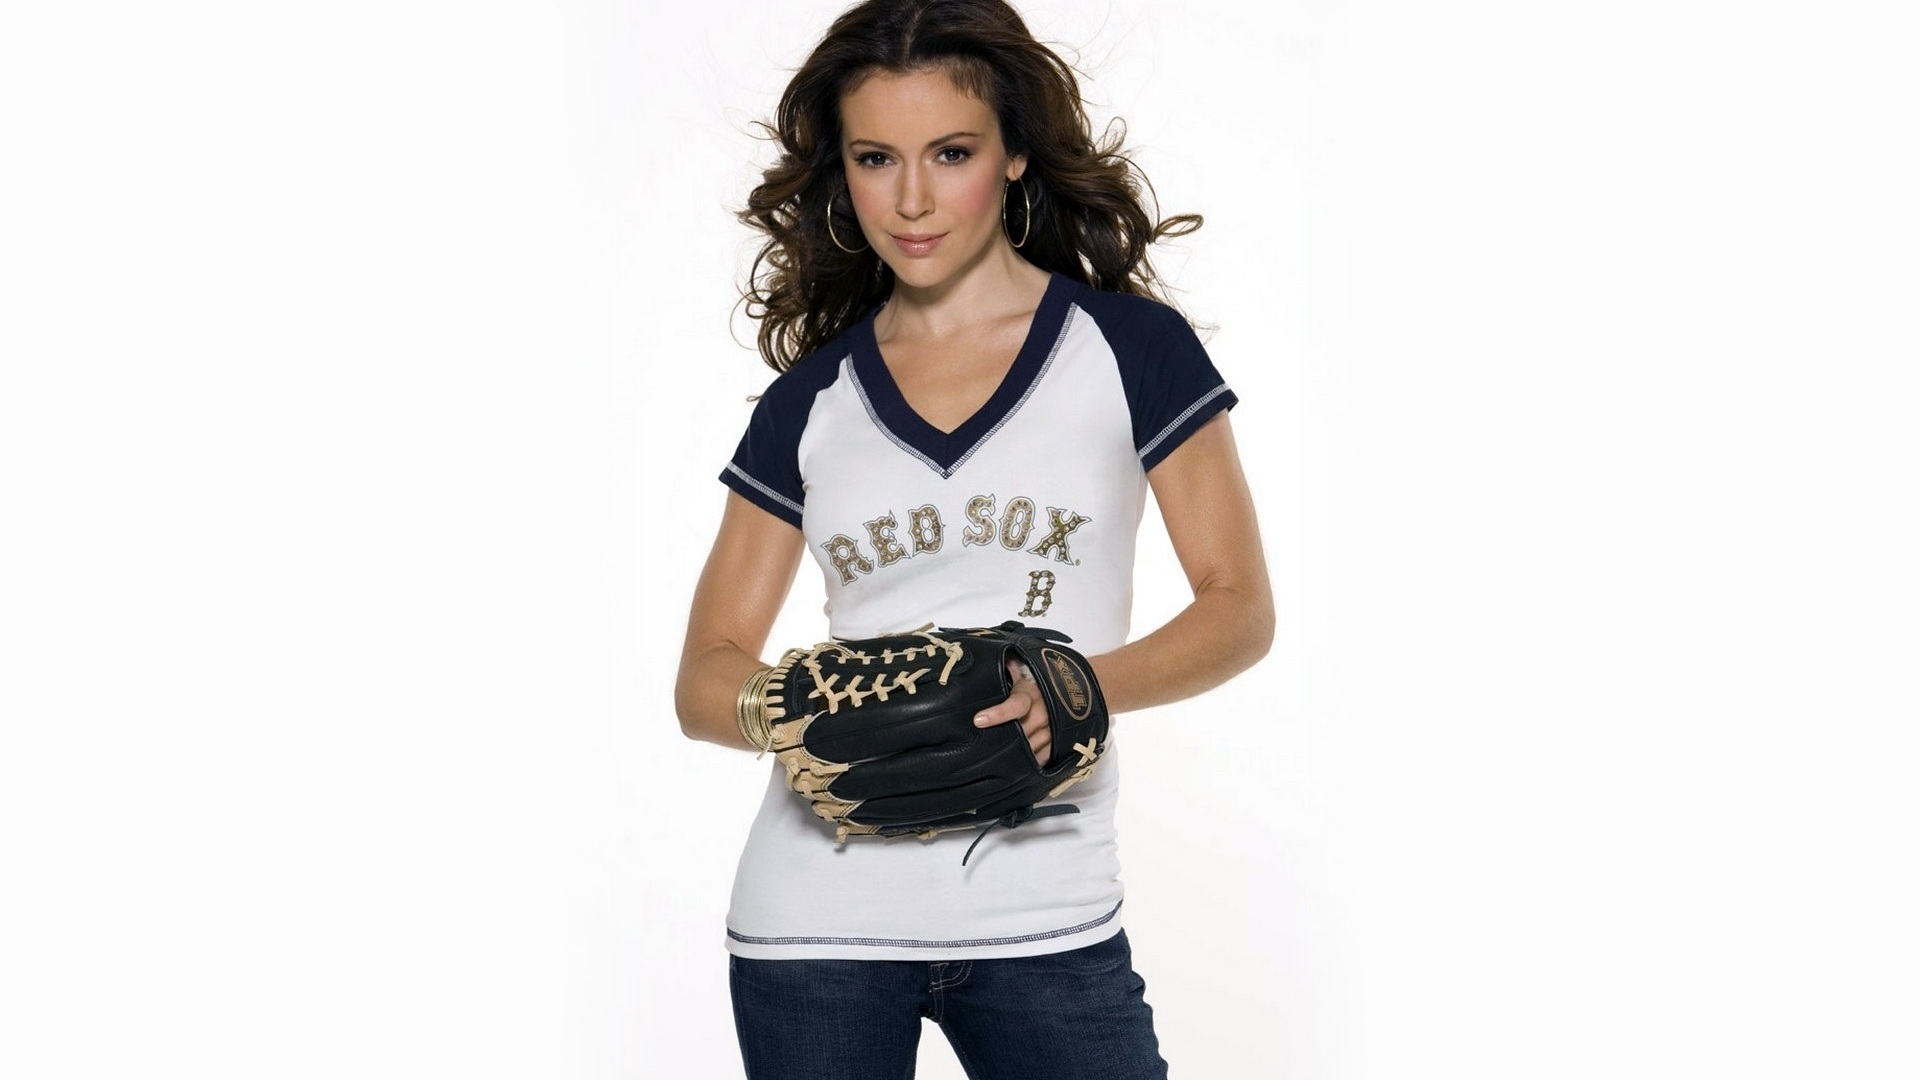 1024x600 Alyssa Milano Sporty Look Images 1024x600 Resolution Images, Photos, Reviews